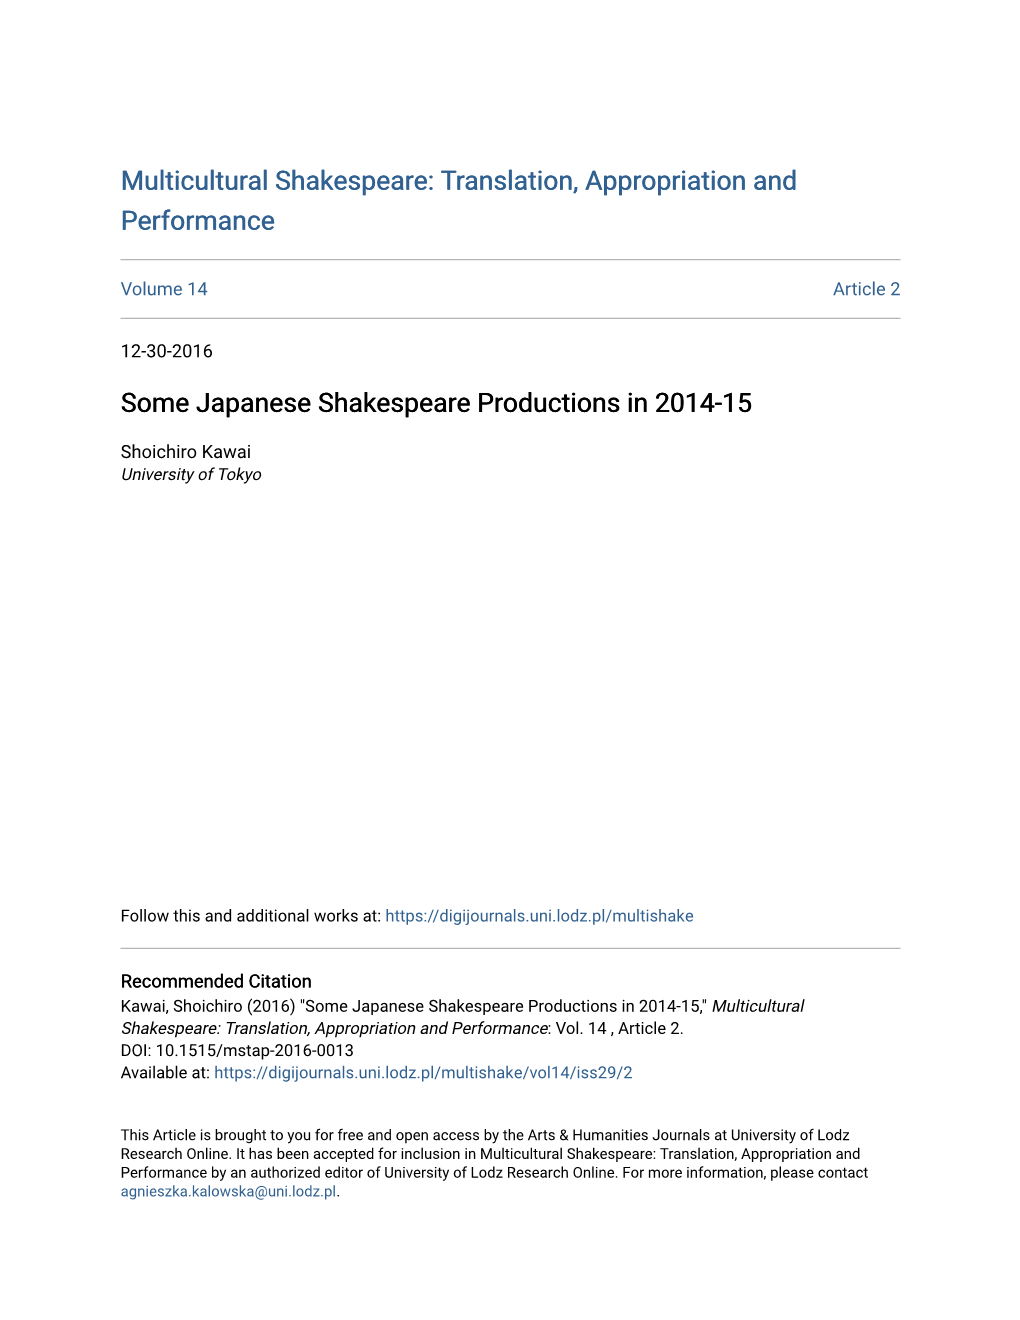 Some Japanese Shakespeare Productions in 2014-15